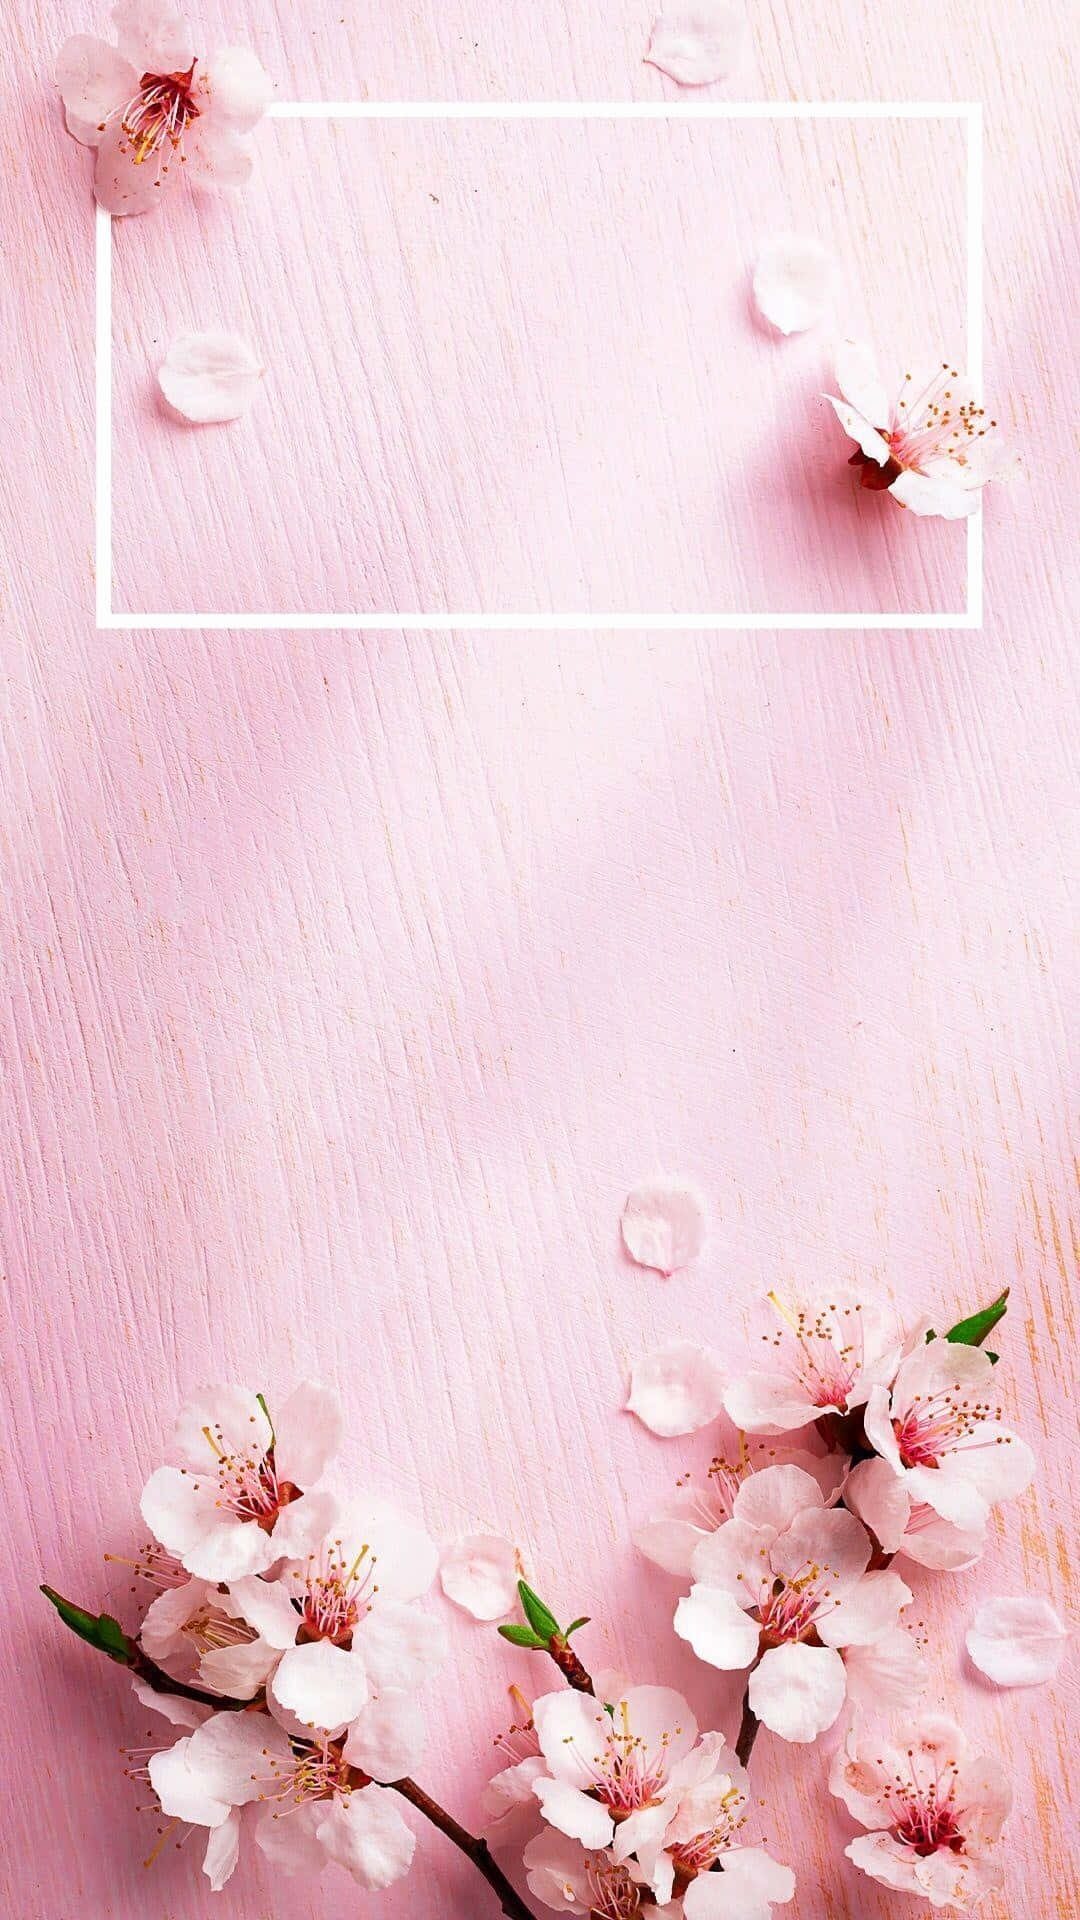 "Aesthetic Rose Blooms in Soft Pink Hues"